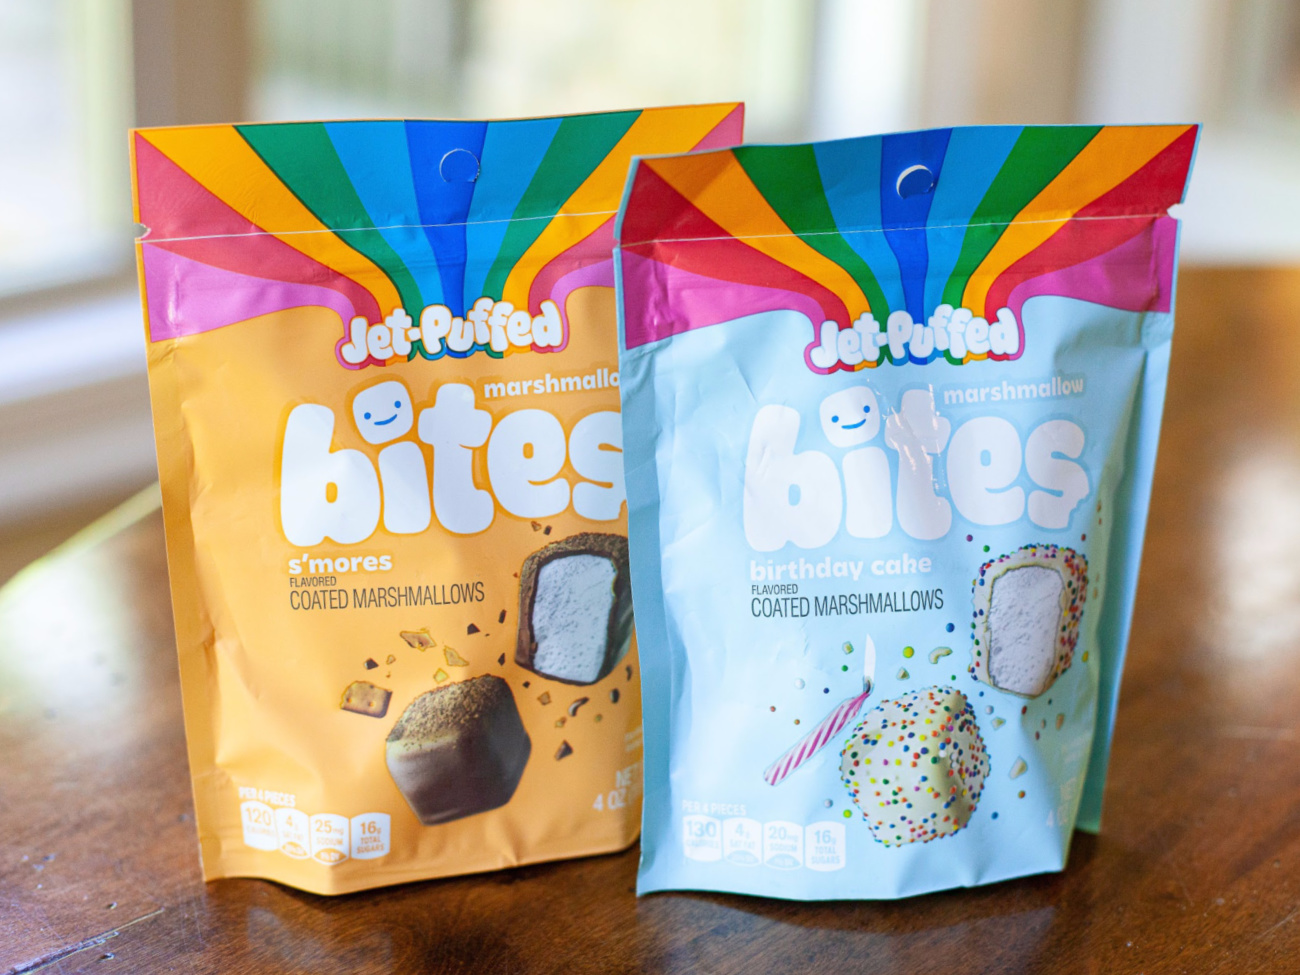 New Jet-Puffed Marshmallow Bites - Look For New Coupon & Give Them A Try on I Heart Publix